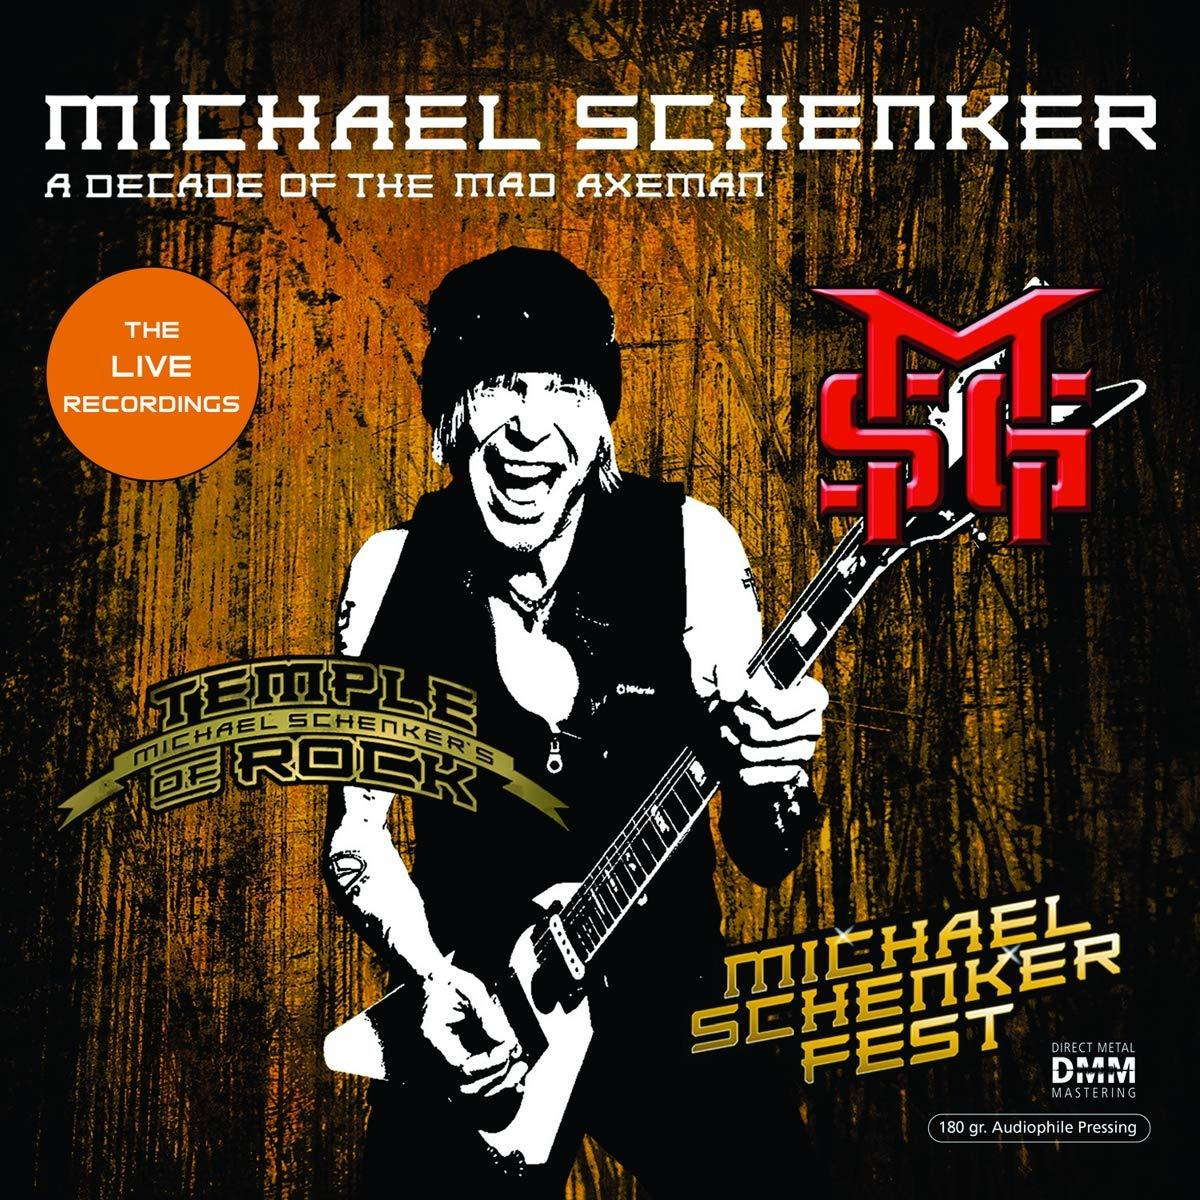 Michael Schenker - A DECADE AXEMAN/LIVE (2LP) (Vinyl) OF THE RECORDINGS - MAD